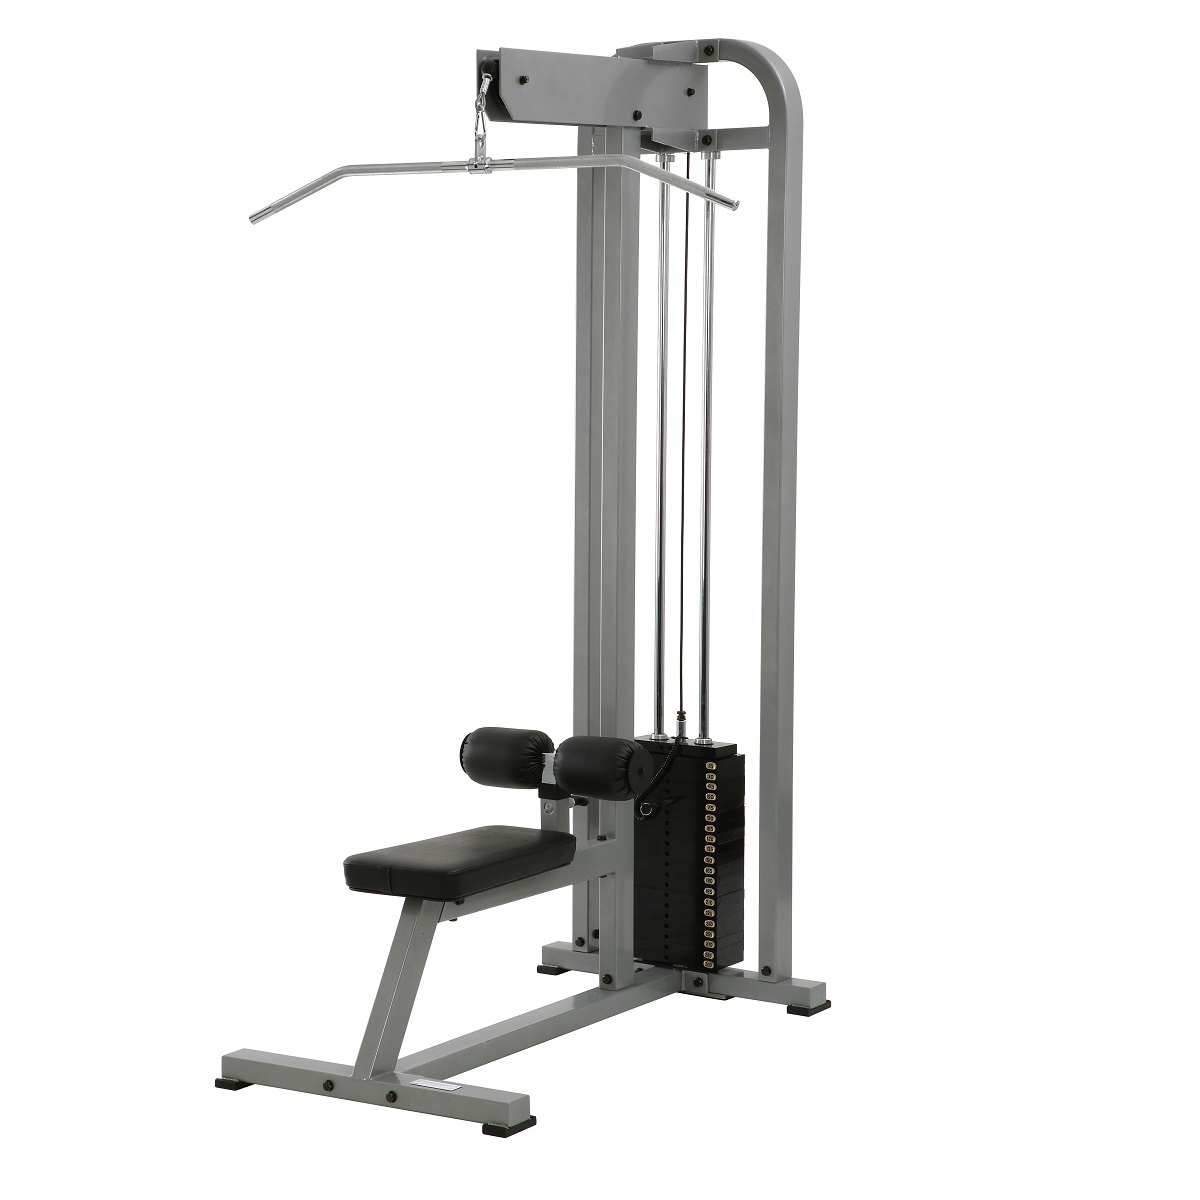 6 Day Lat Pulldown Machines for push your ABS